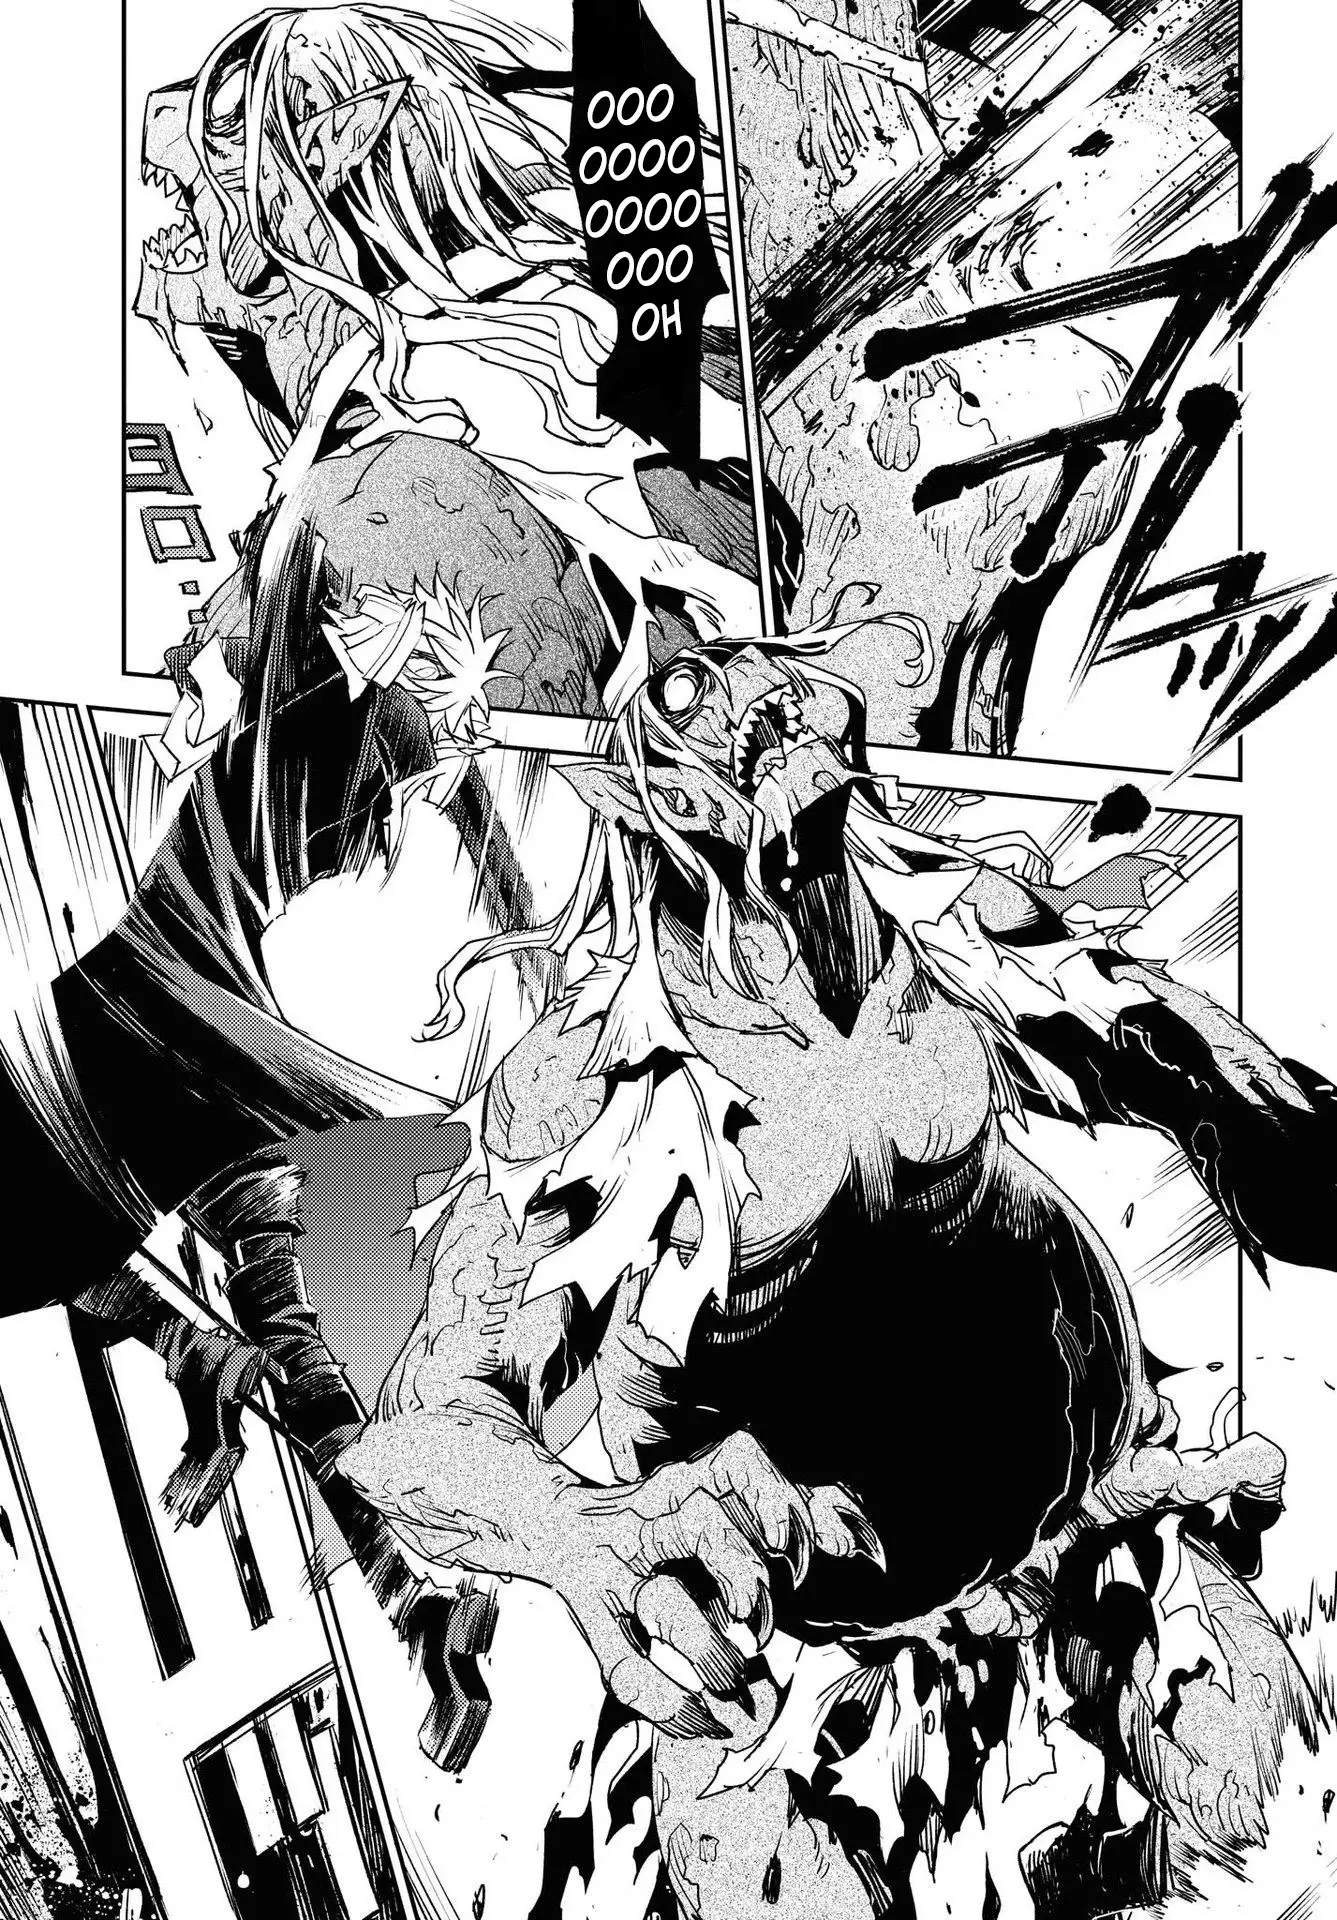 Fate/grand Order: Epic Of Remnant - Subspecies Singularity Iv: Taboo Advent Salem: Salem Of Heresy - 16 page 16